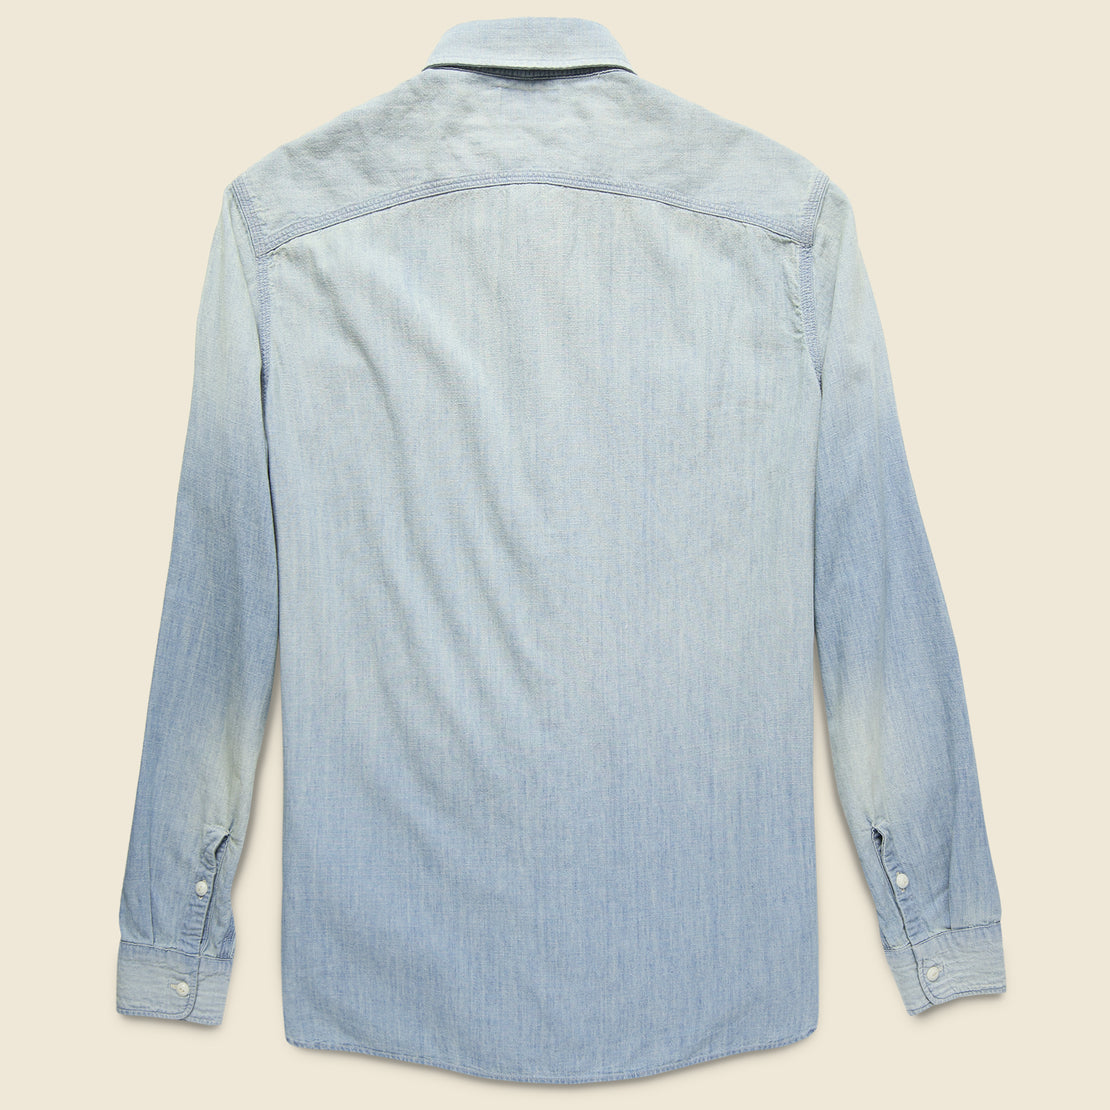 Farrell Chambray Workshirt - Medium Wash - RRL - STAG Provisions - W - Tops - L/S Woven